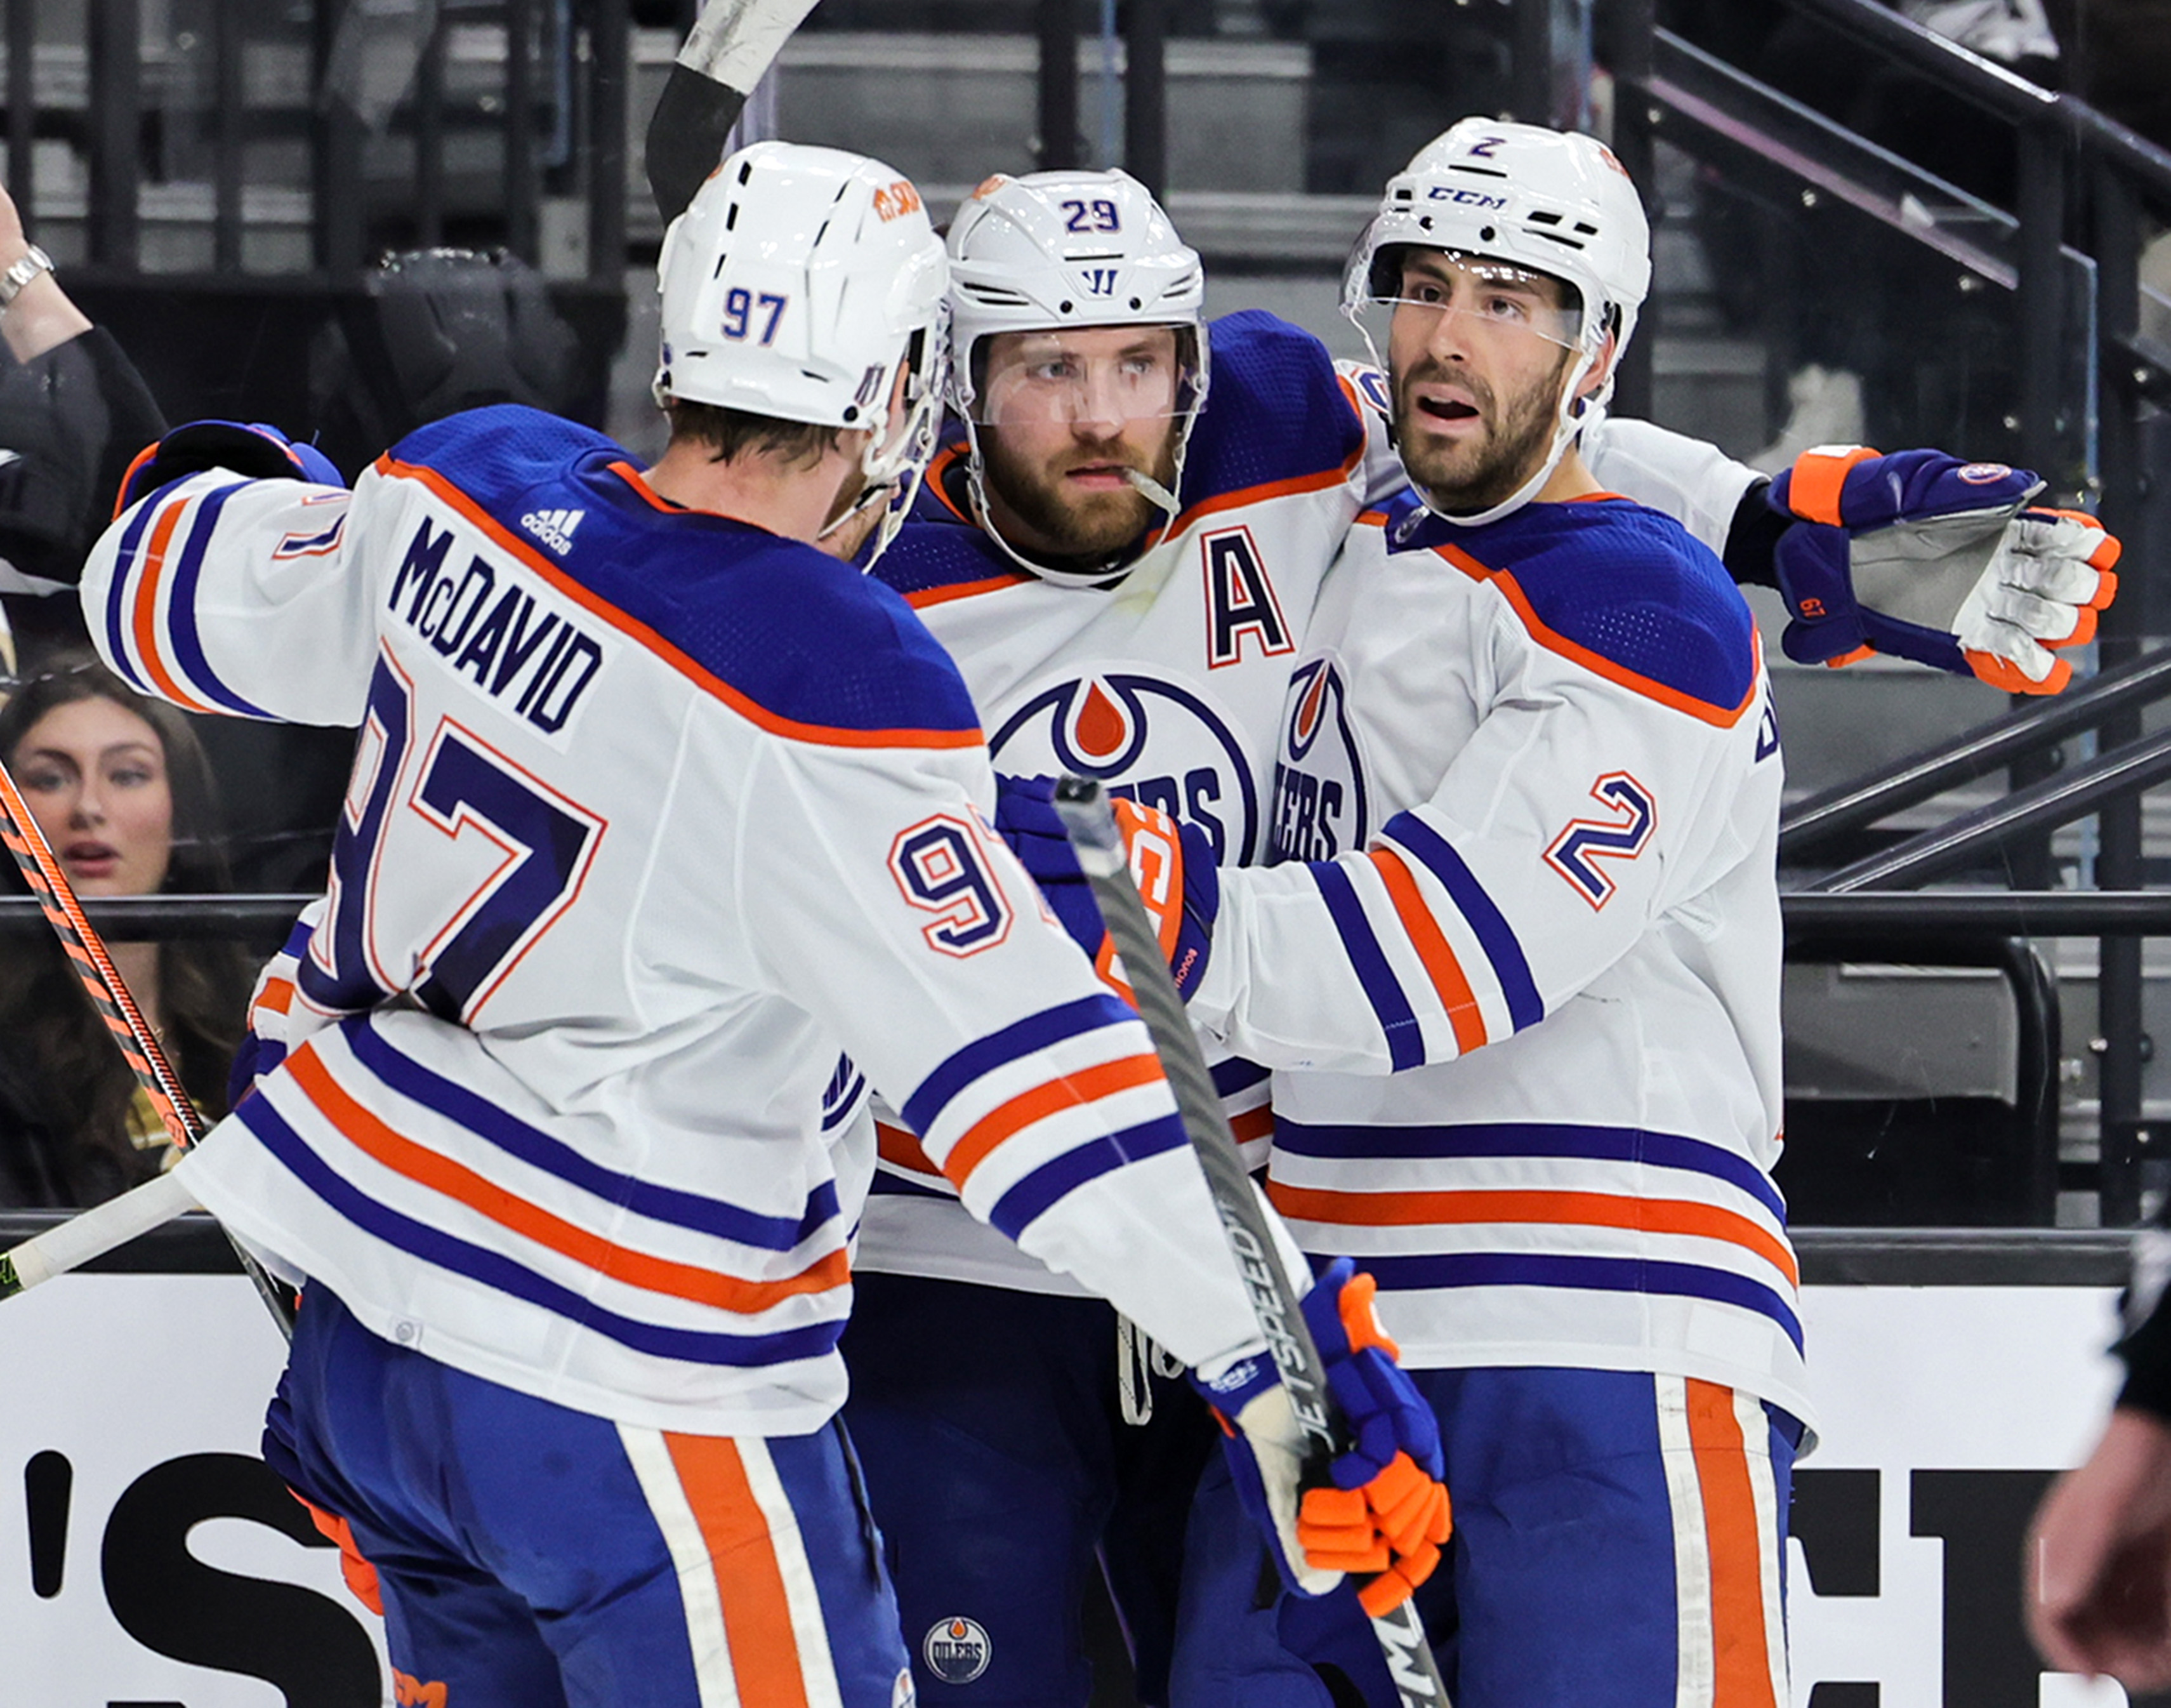 Edmonton Oiler Leon Draisaitl's star is shining bright during the playoffs  - The Globe and Mail